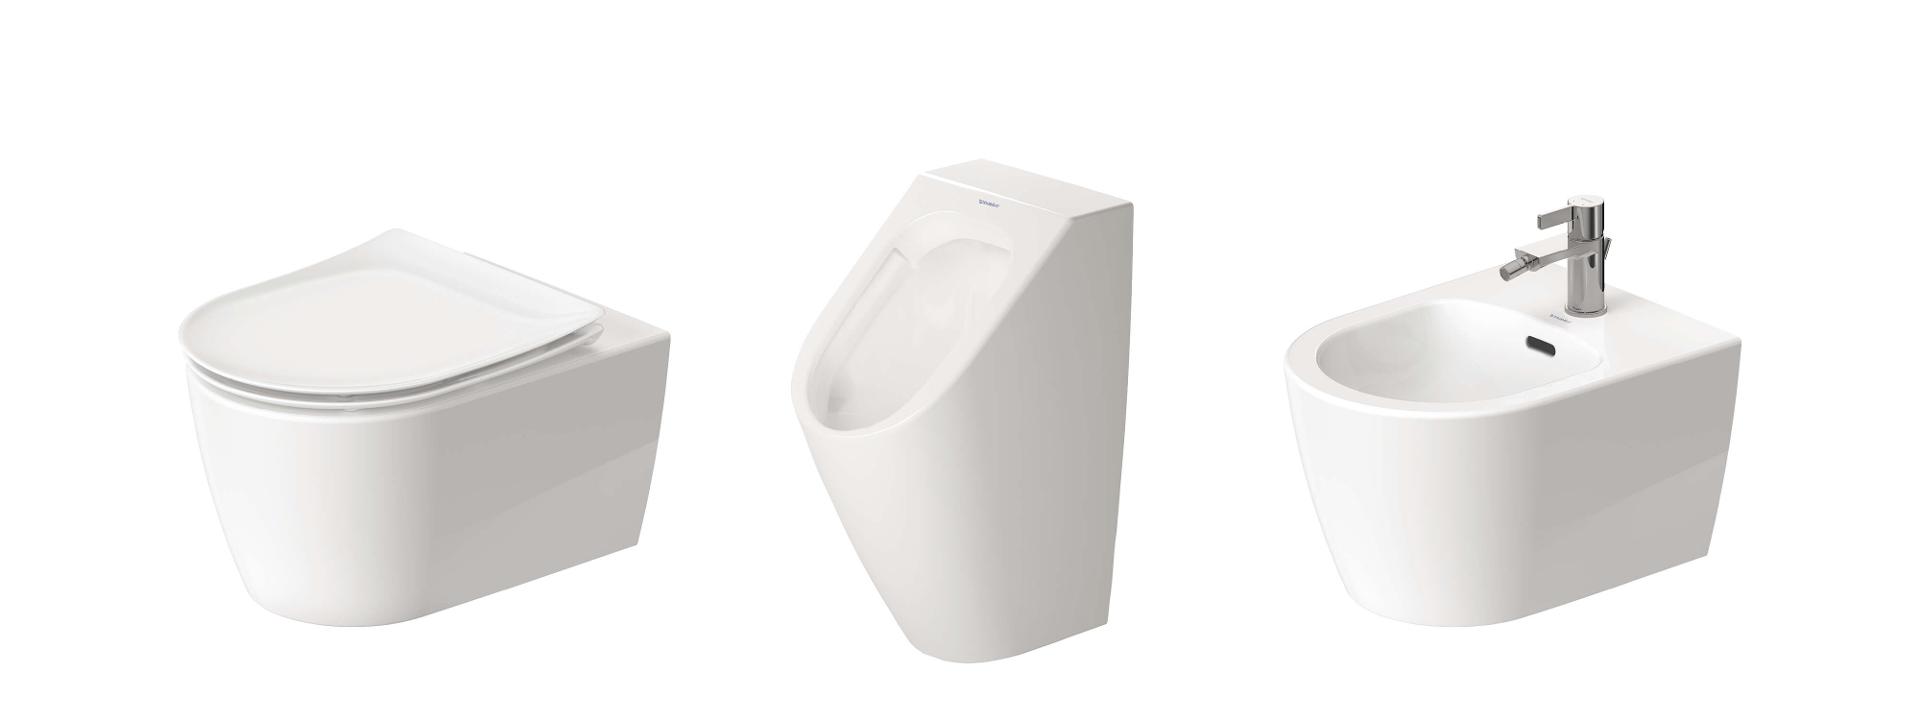 Wall mounted Soleil WC with bidet and urinal